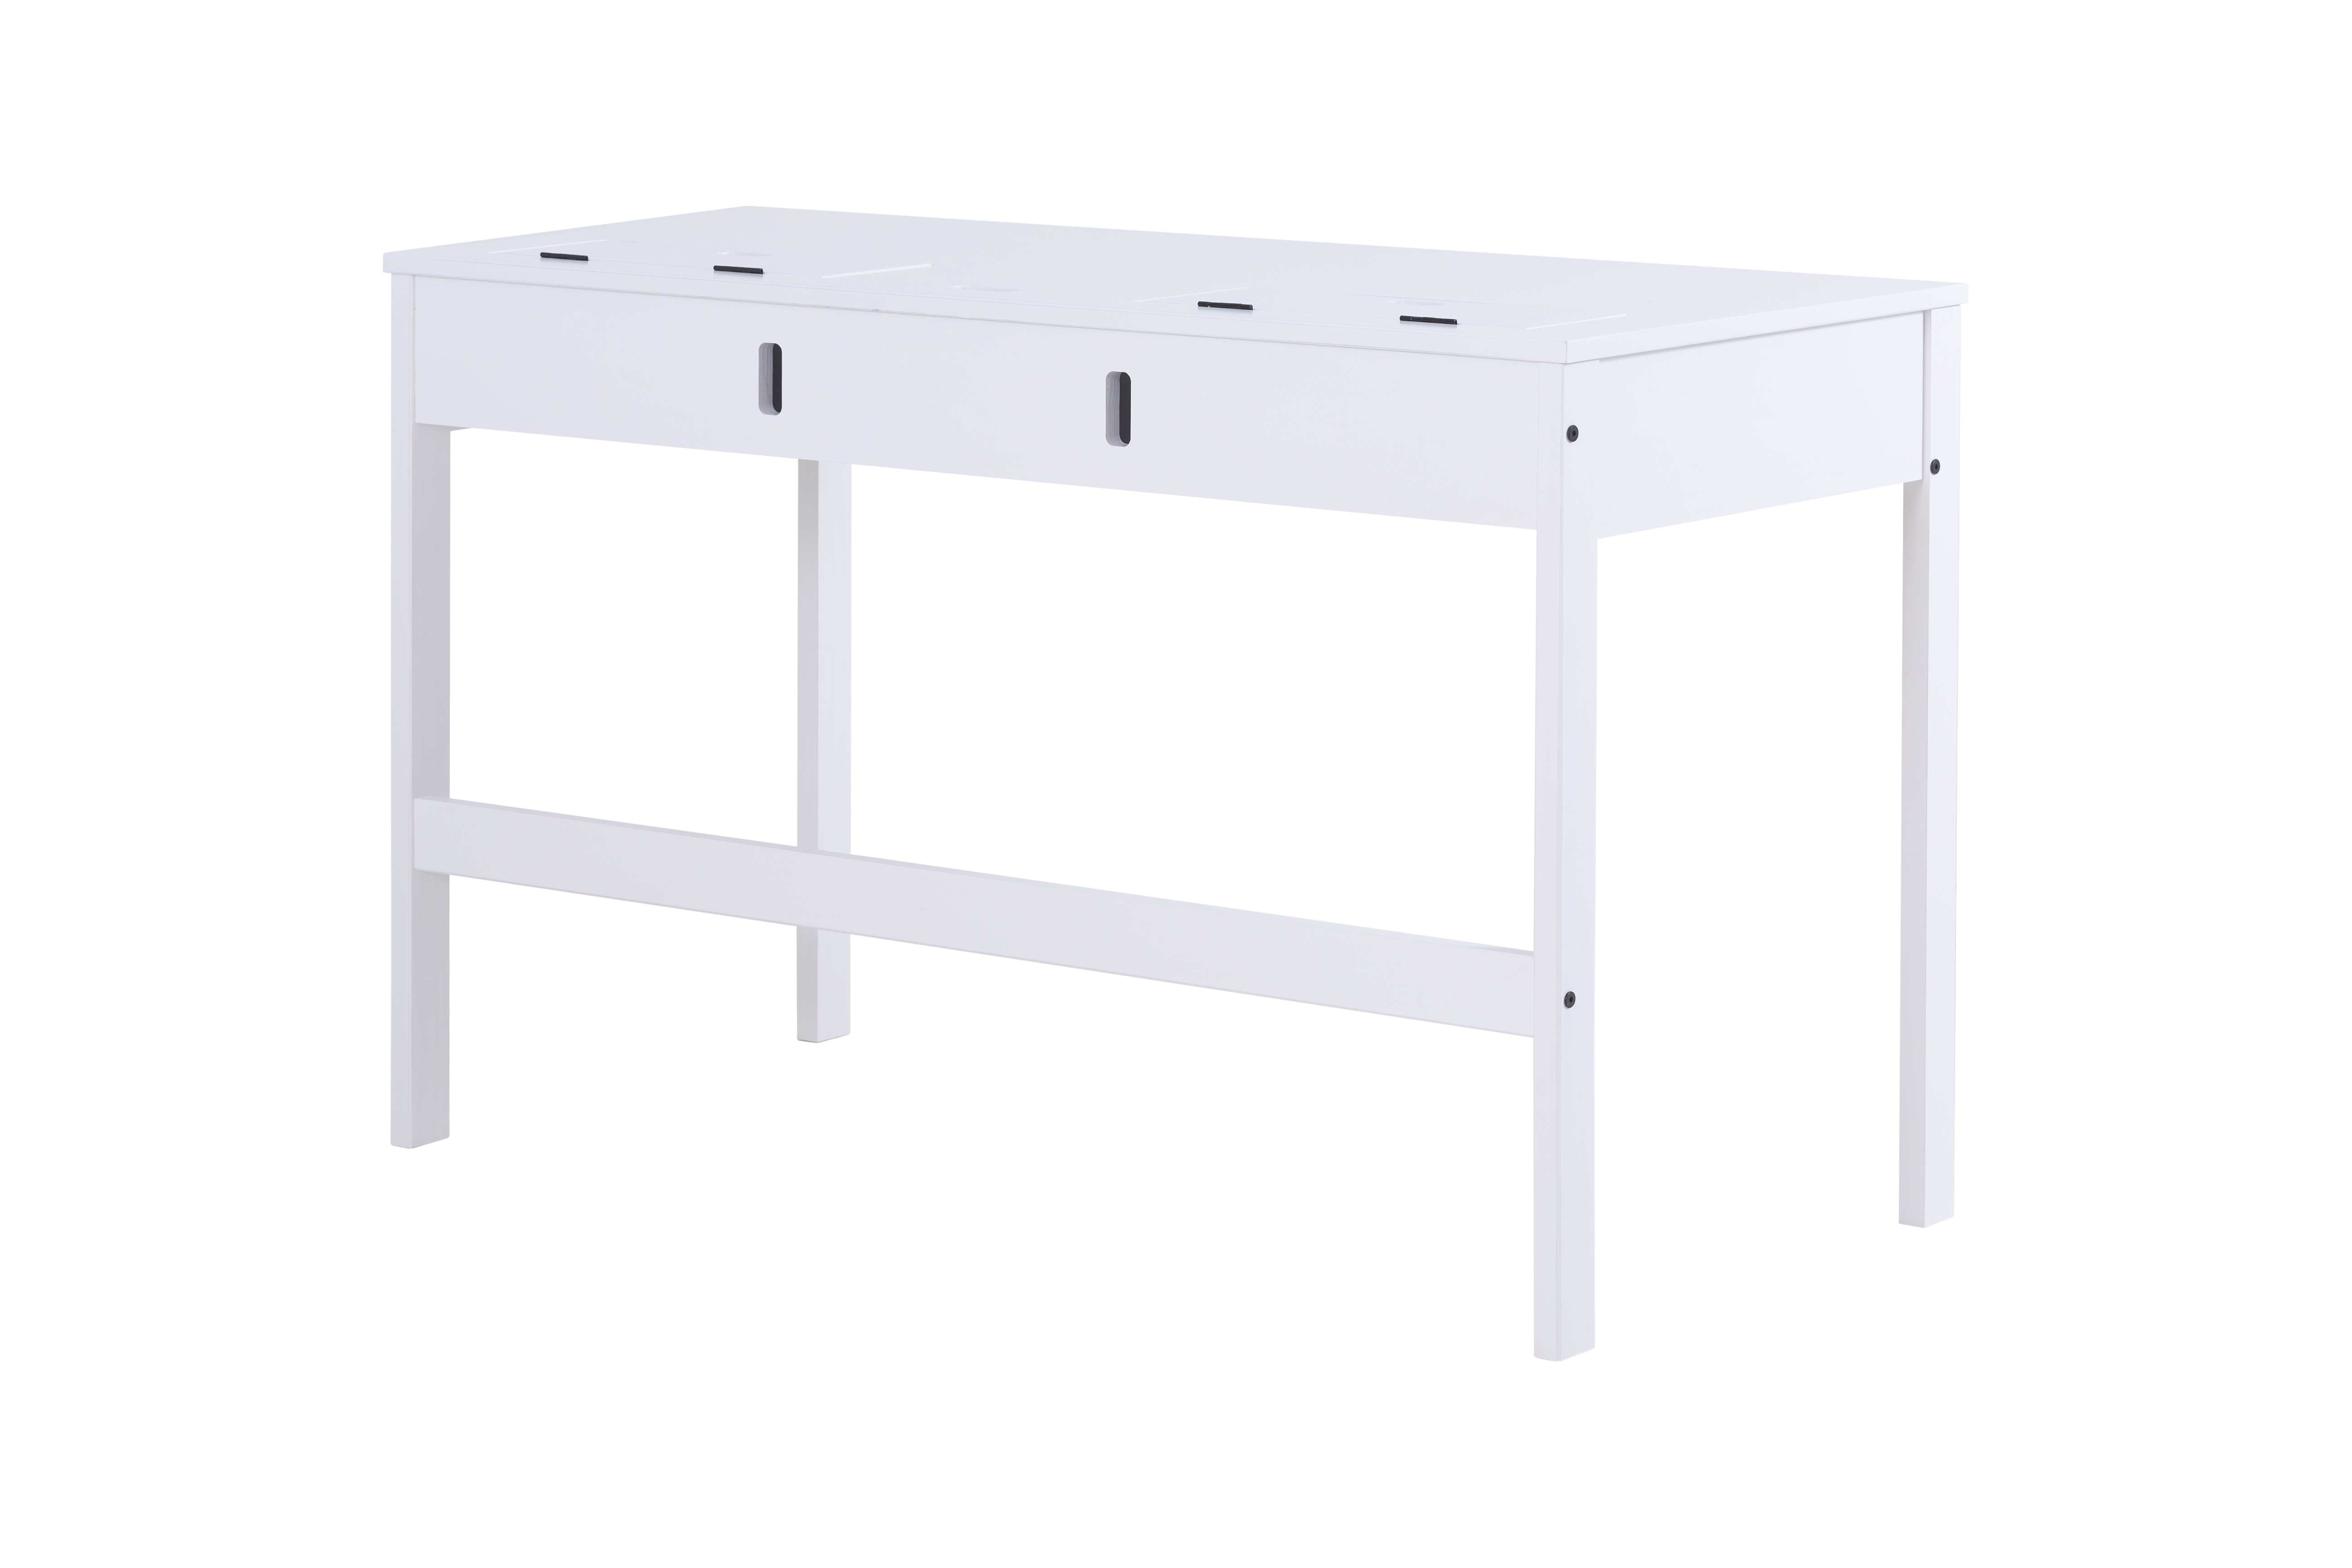 Memomad Bali Home Office Desk with Drawers (Off White) - memomad.store